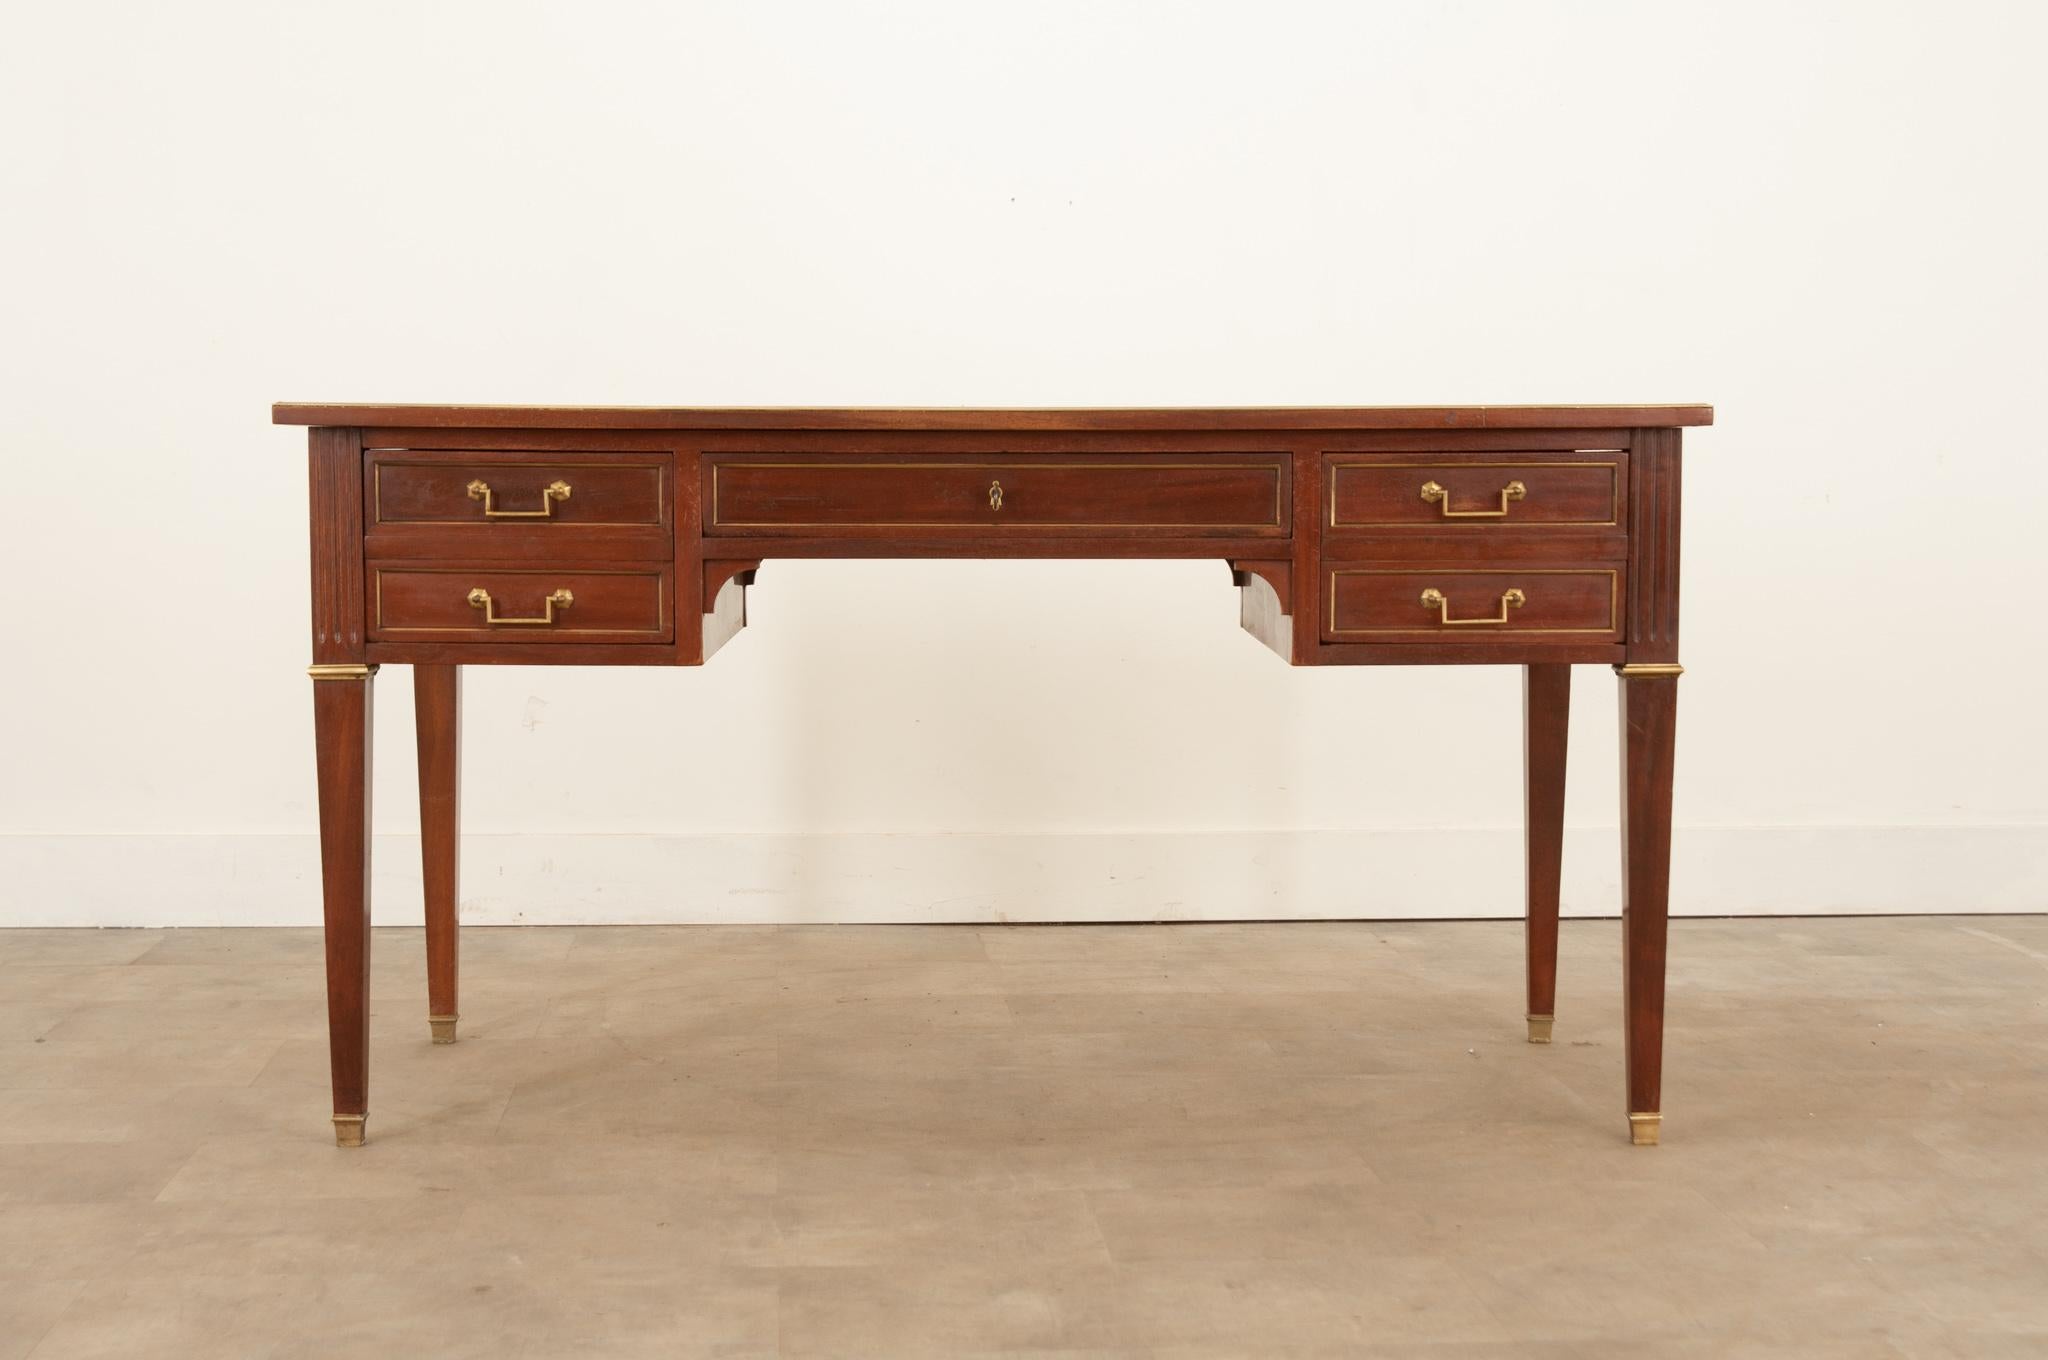 A smart mahogany desk - with leather writing surface - from 19th Century France. This beautiful antique has a unique, transitional design that is heavily influenced by Louis XVI style. The top and drawer fronts are all trimmed in brass, and the legs